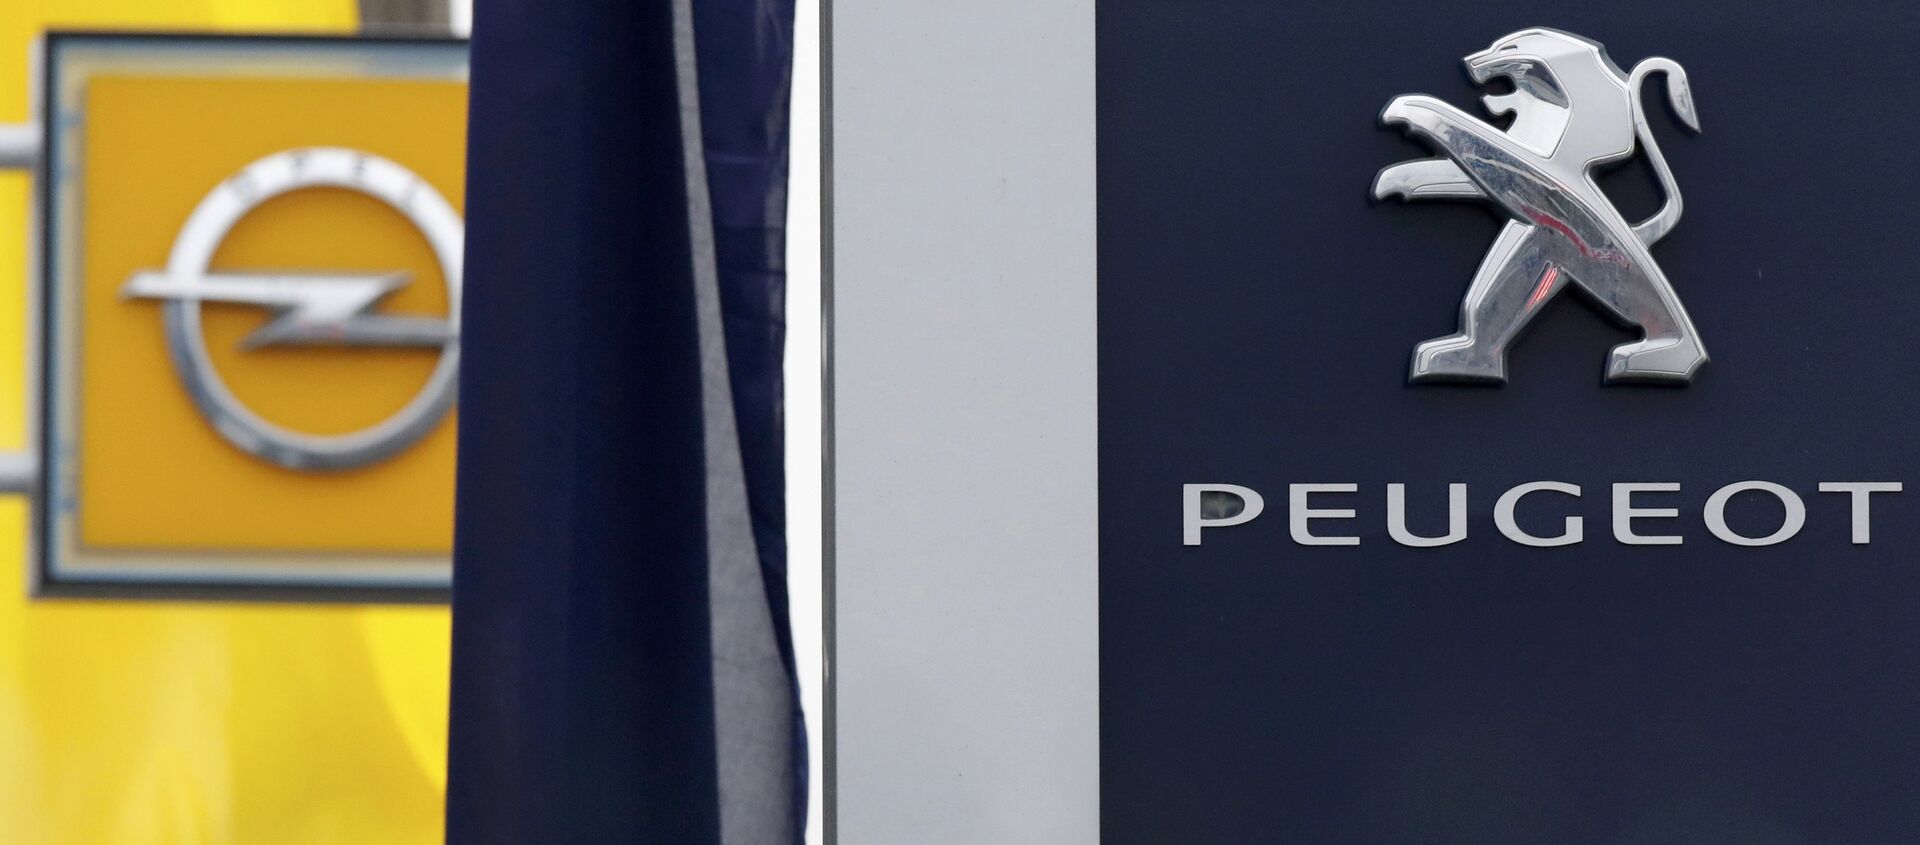 The logos of French car maker Peugeot and German car maker Opel are seen at a dealership in Villepinte, near Paris, France, February 20, 2017. - Sputnik Afrique, 1920, 31.10.2019